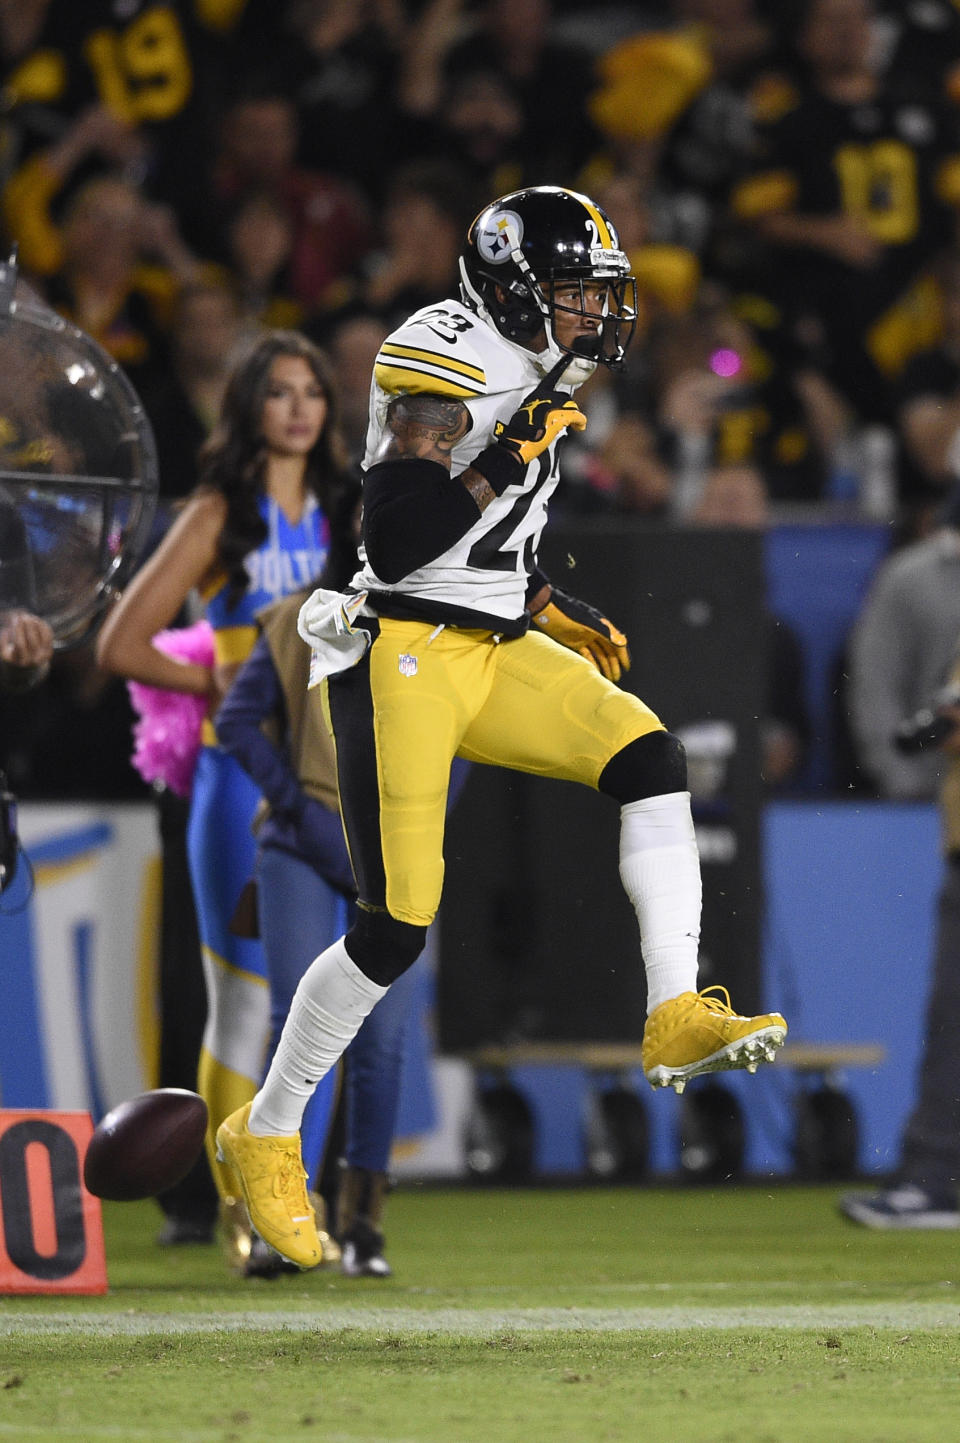 Pittsburgh Steelers cornerback Joe Haden celebrates after breaking up a pass during the second half of an NFL football game against the Los Angeles Chargers, Sunday, Oct. 13, 2019, in Carson, Calif. (AP Photo/Kelvin Kuo)